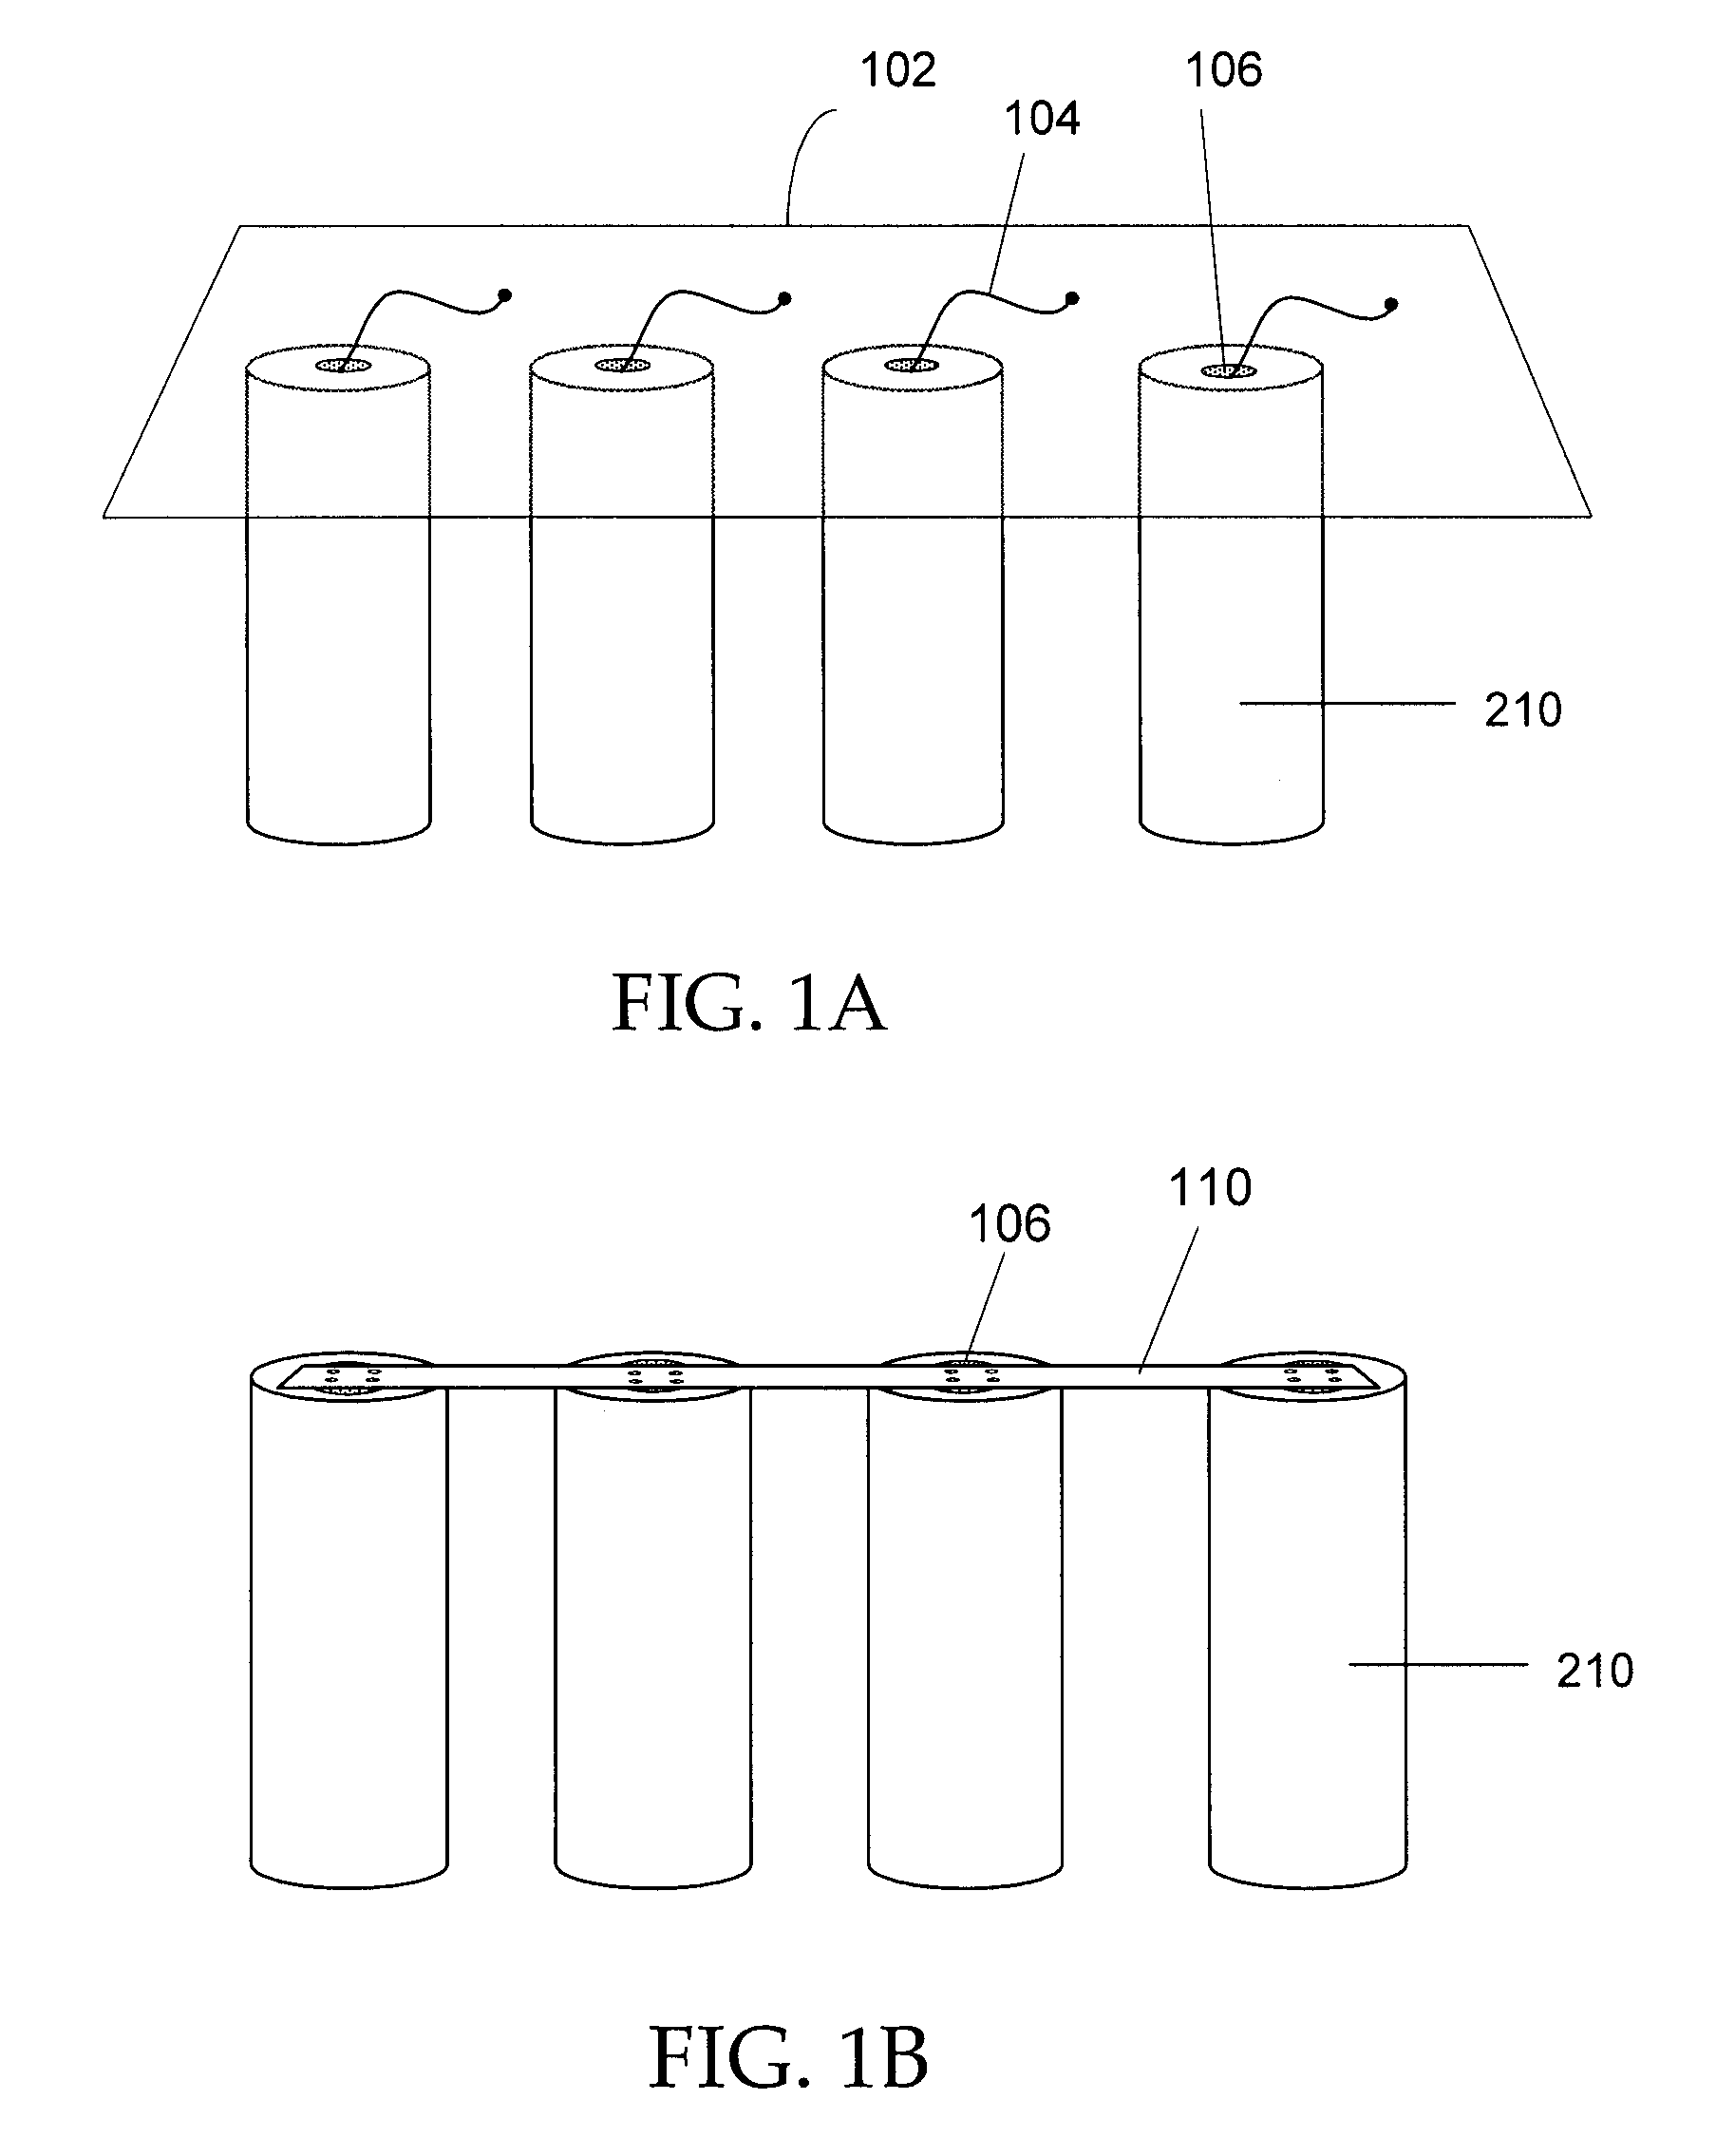 Method of electrically connecting cell terminals in a battery pack